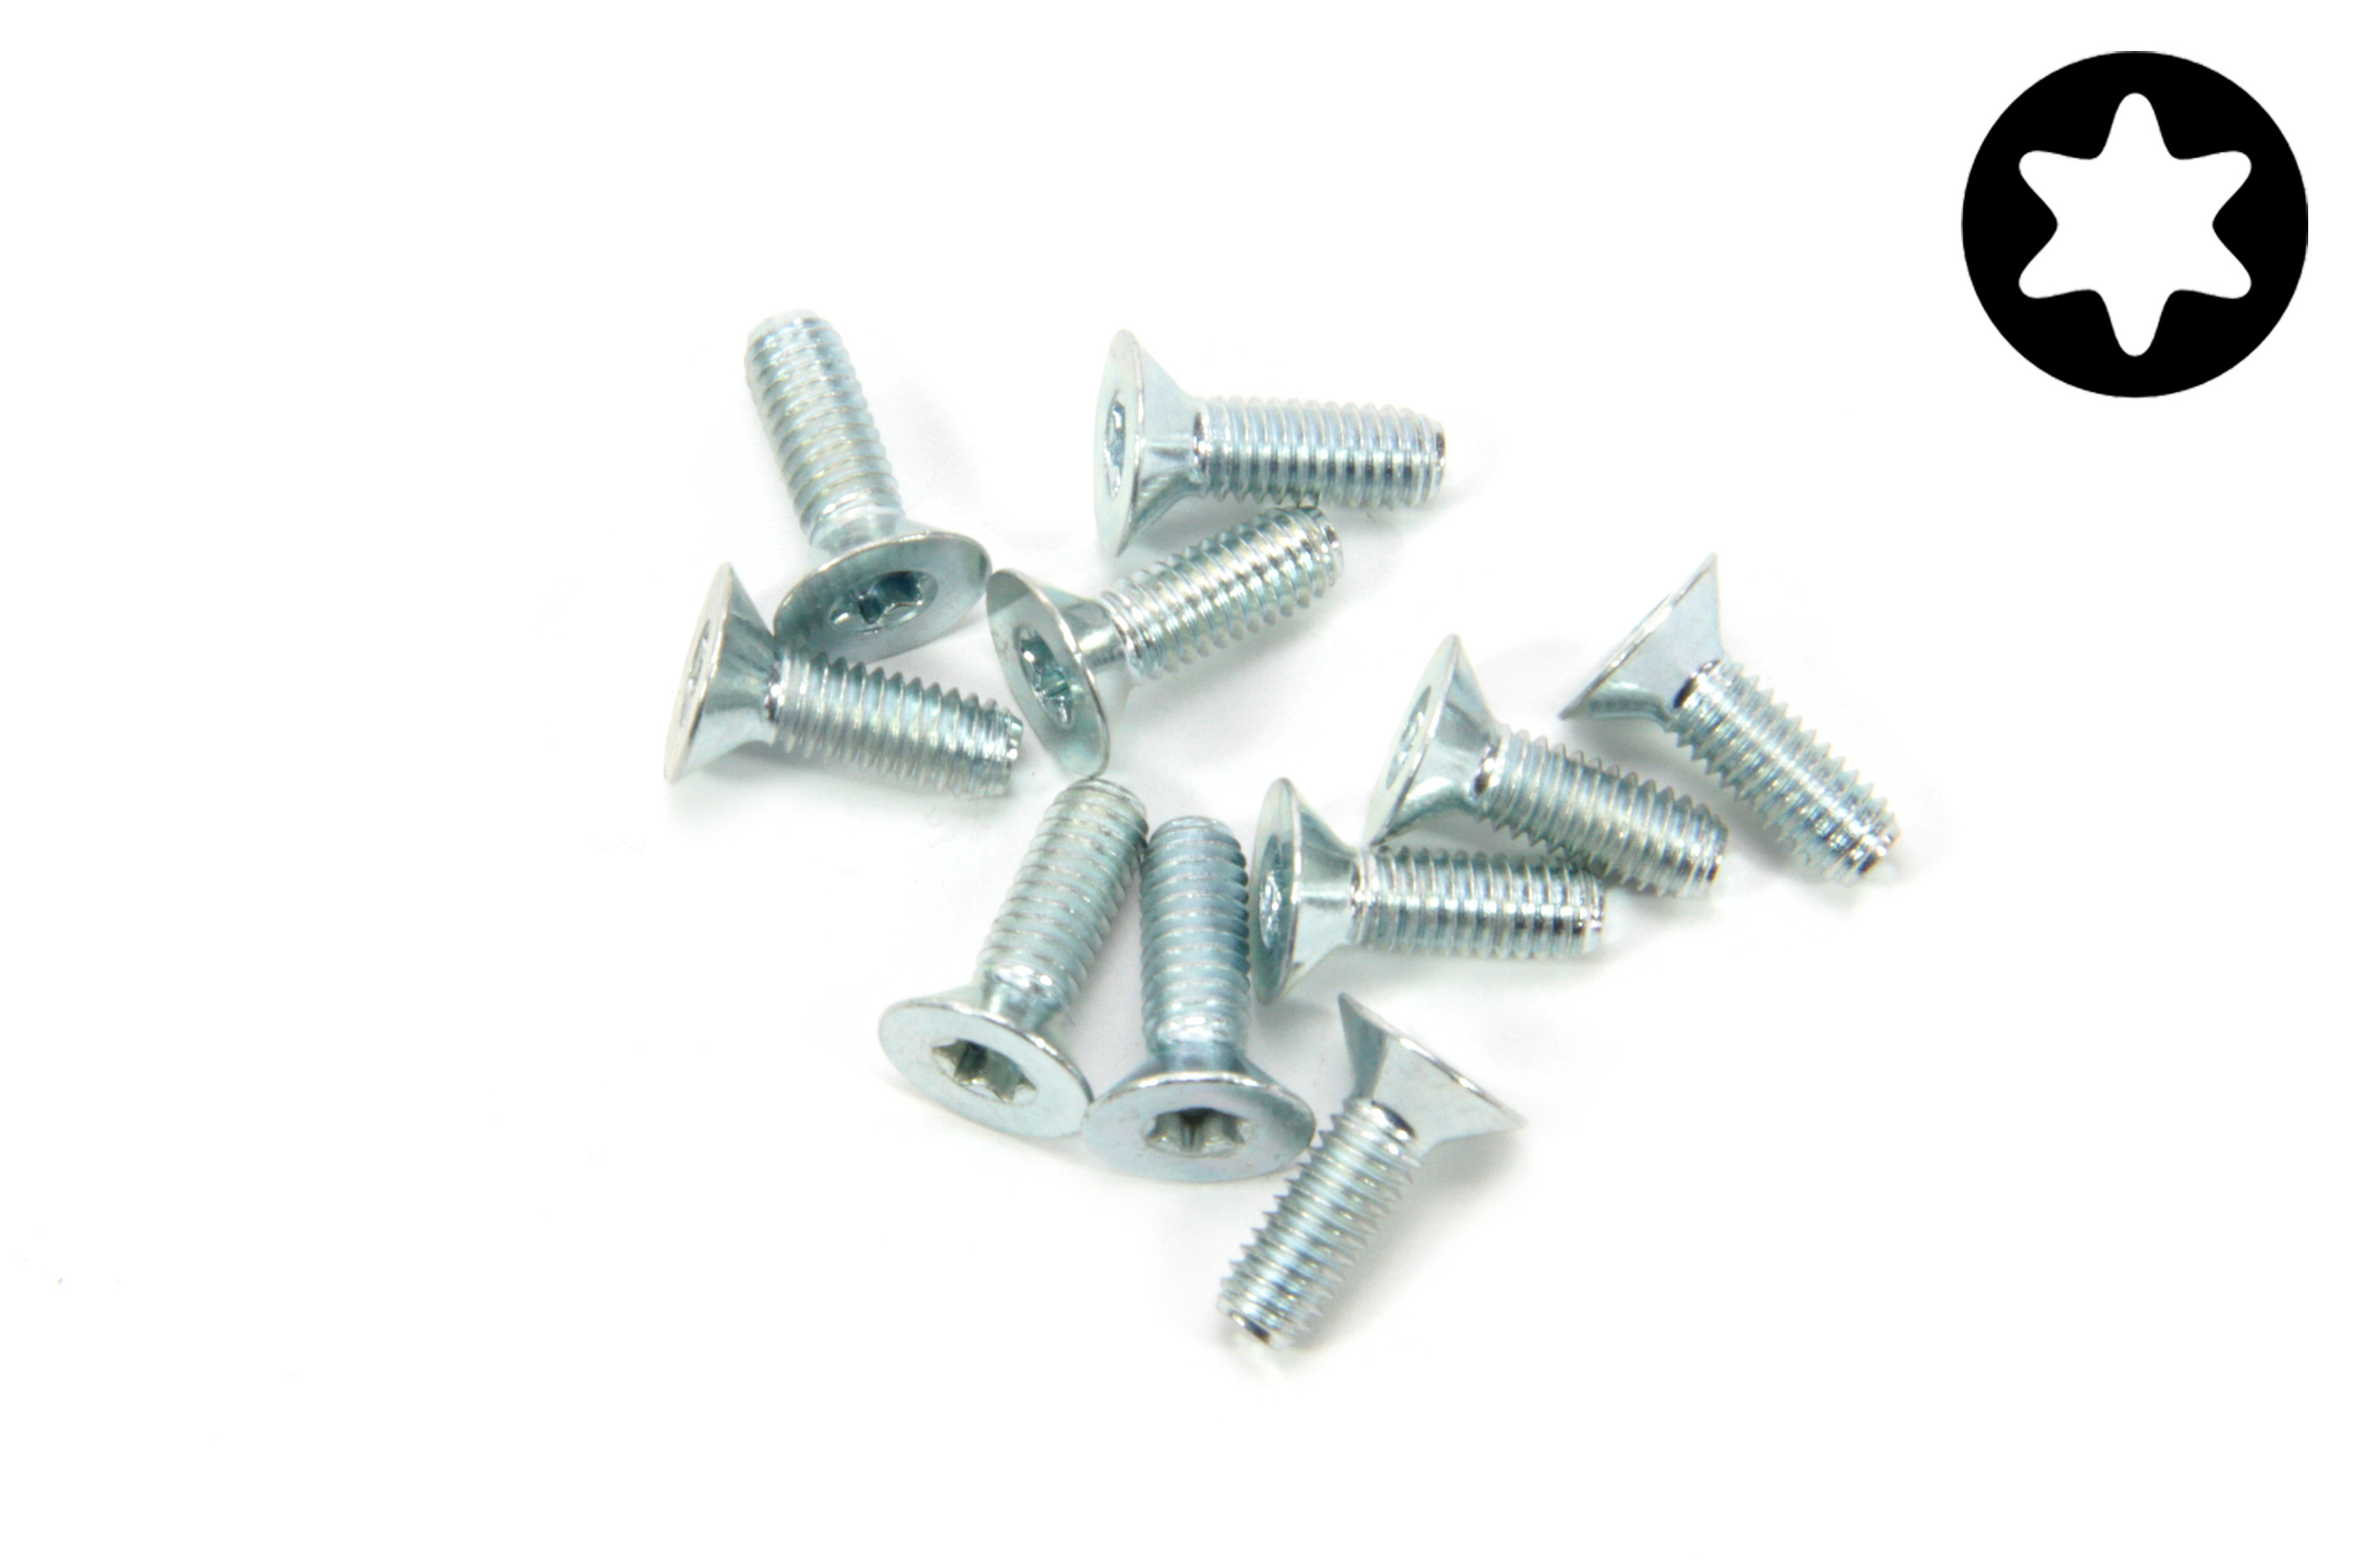 6920/12 FG Countersunk screw with Torx M4 x 12 mm, 10 pieces